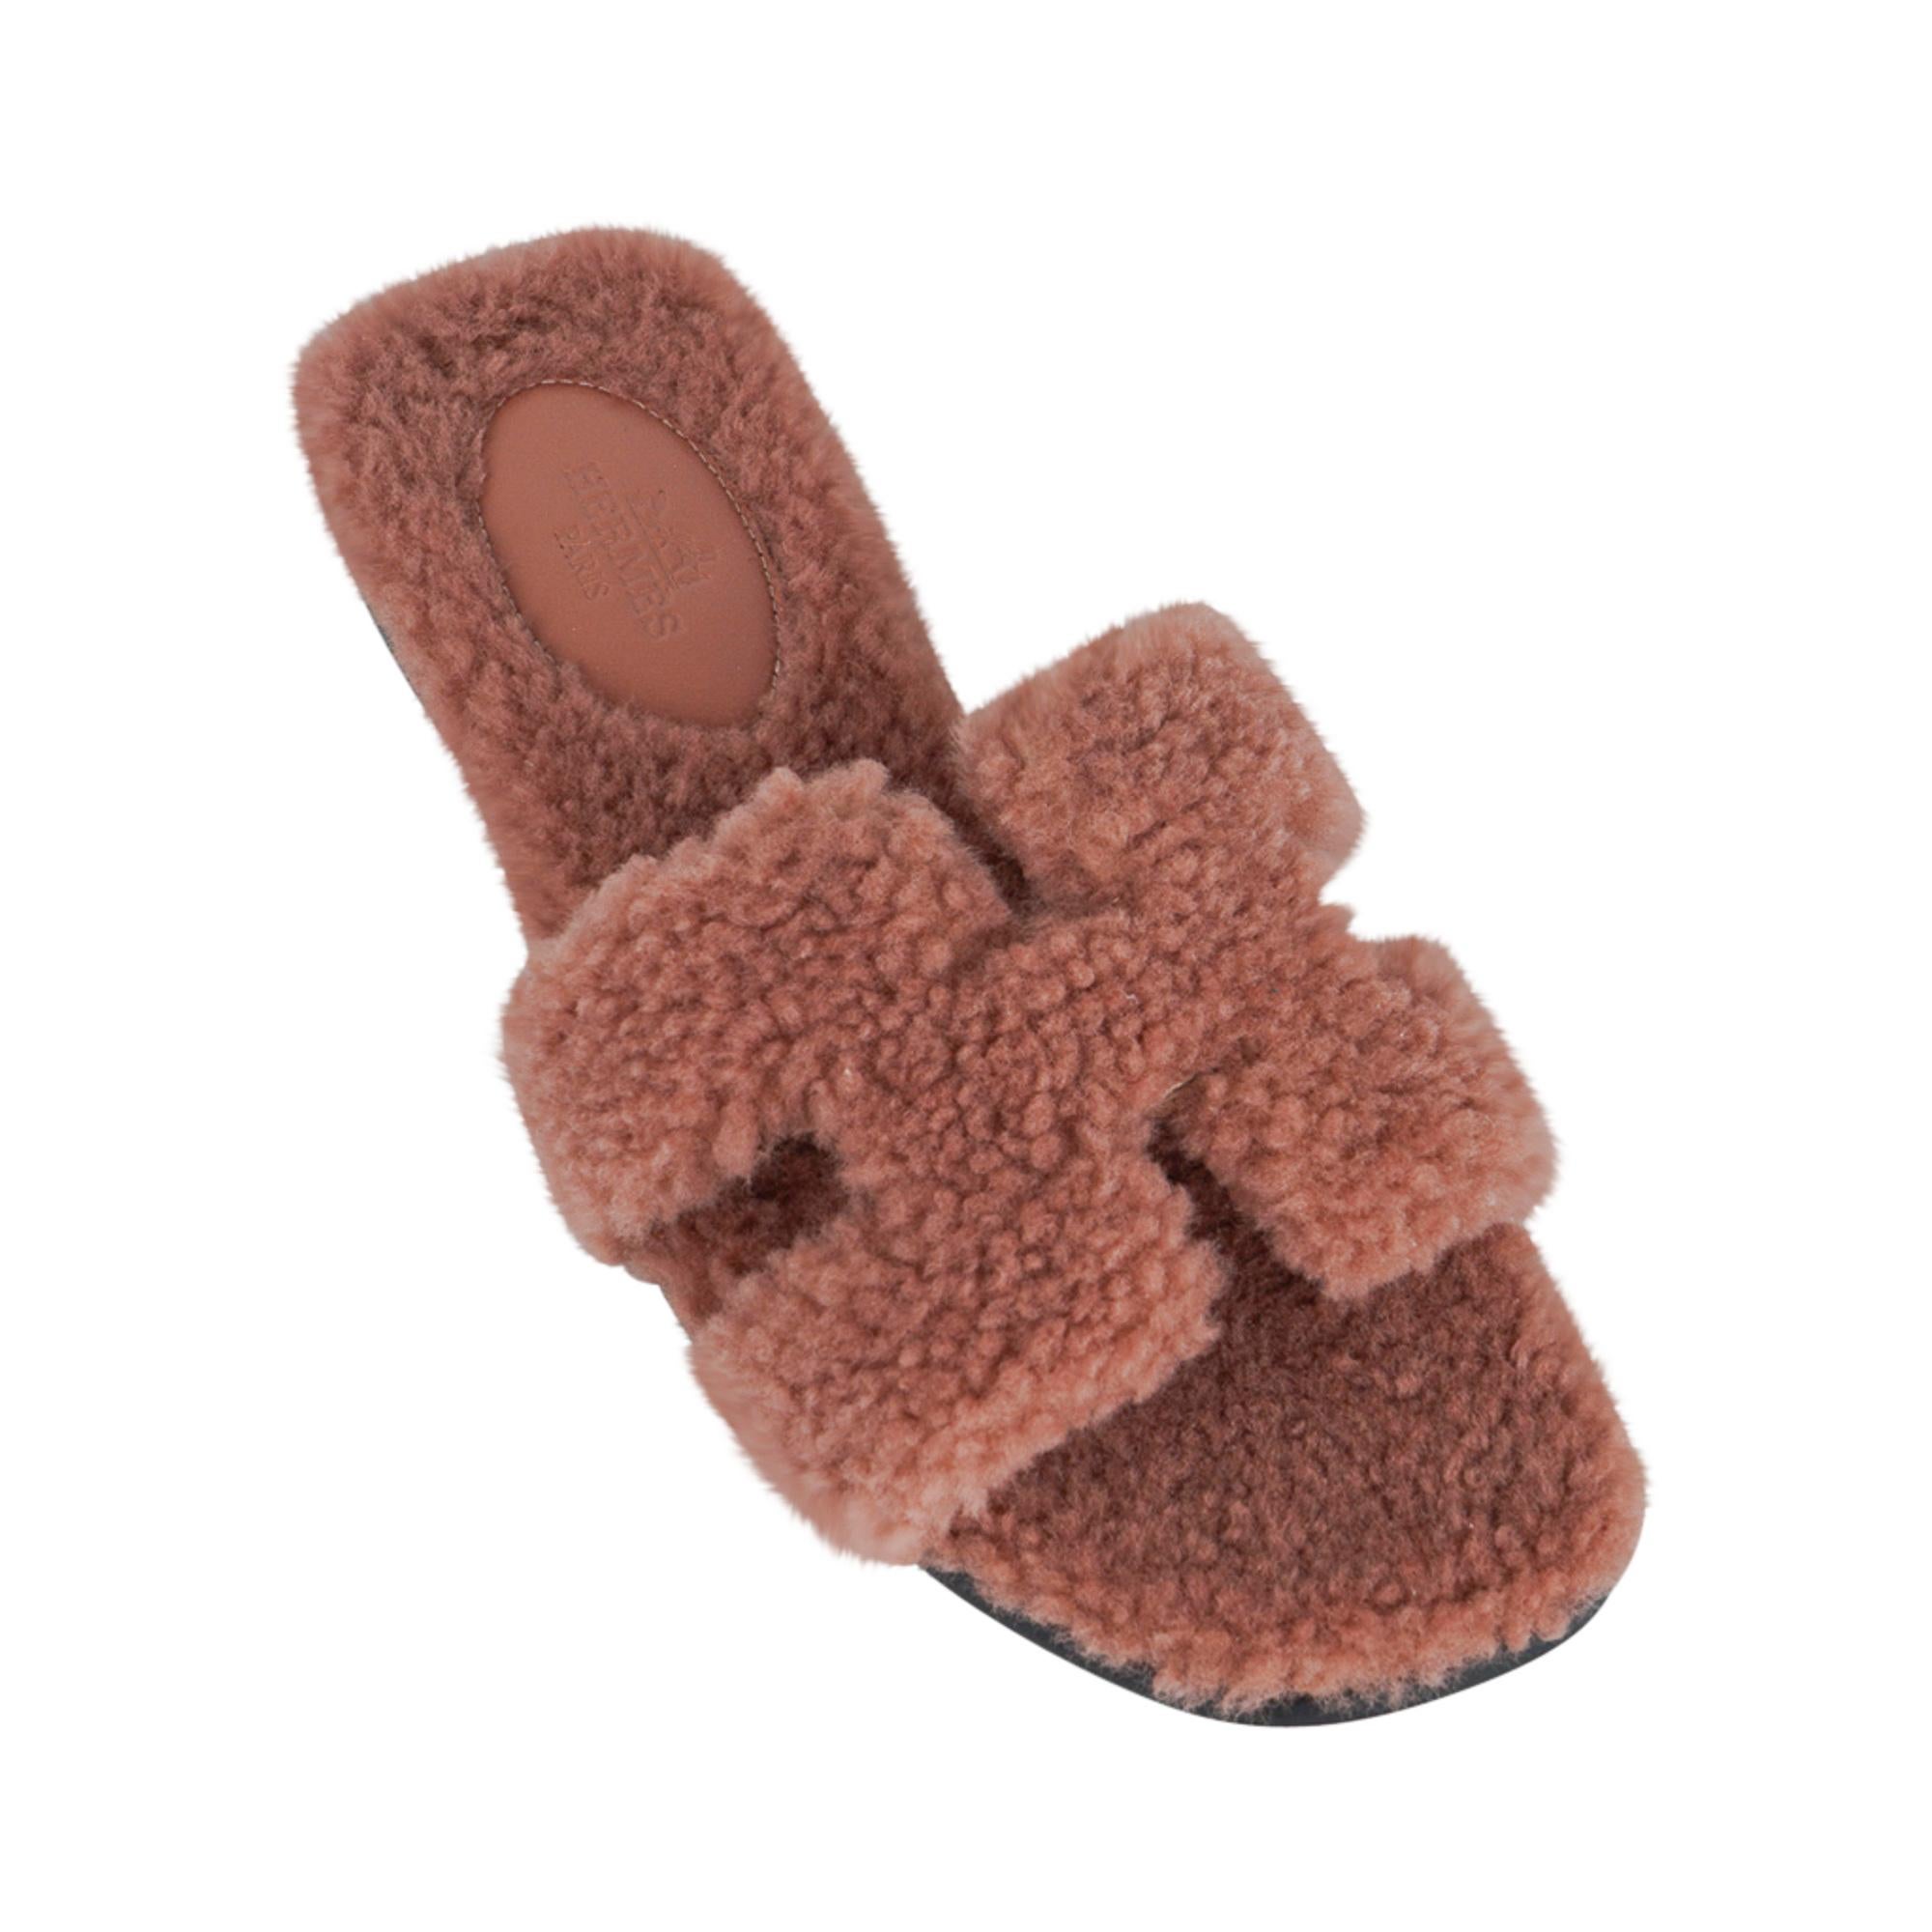 Mightychic offers a guaranteed authentic Hermes Oran Teddy Bear Rose Aube limited edition flat slide sandal.
Extremely rare size featured in soft neutral muted Rose this Hermes Oran sandal is foot flirting perfection!
Embossed Hermes Paris leather